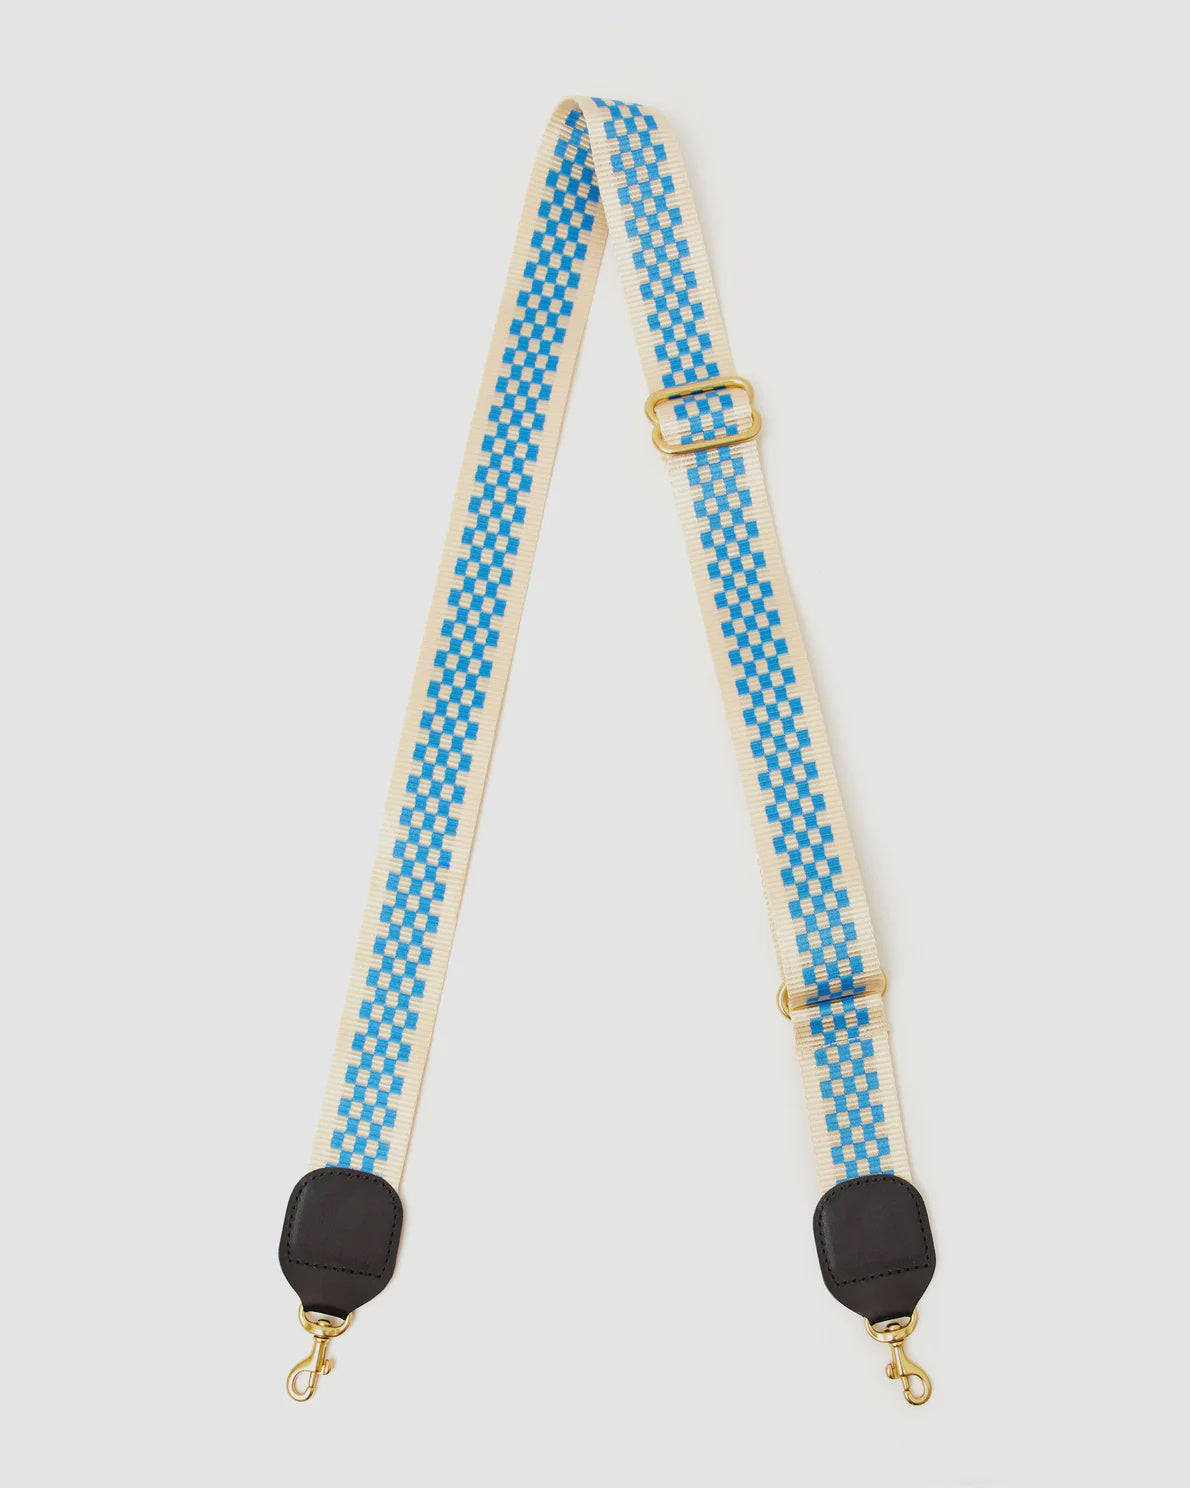 A stylish Clare Vivier Crossbody Strap with a blue and white checkerboard pattern, perfect for your favorite crossbody bag. The strap features black leather ends with gold-tone swivel clasps and an adjustable gold buckle. Made from durable nylon webbing, it ensures both style and longevity on a white background.